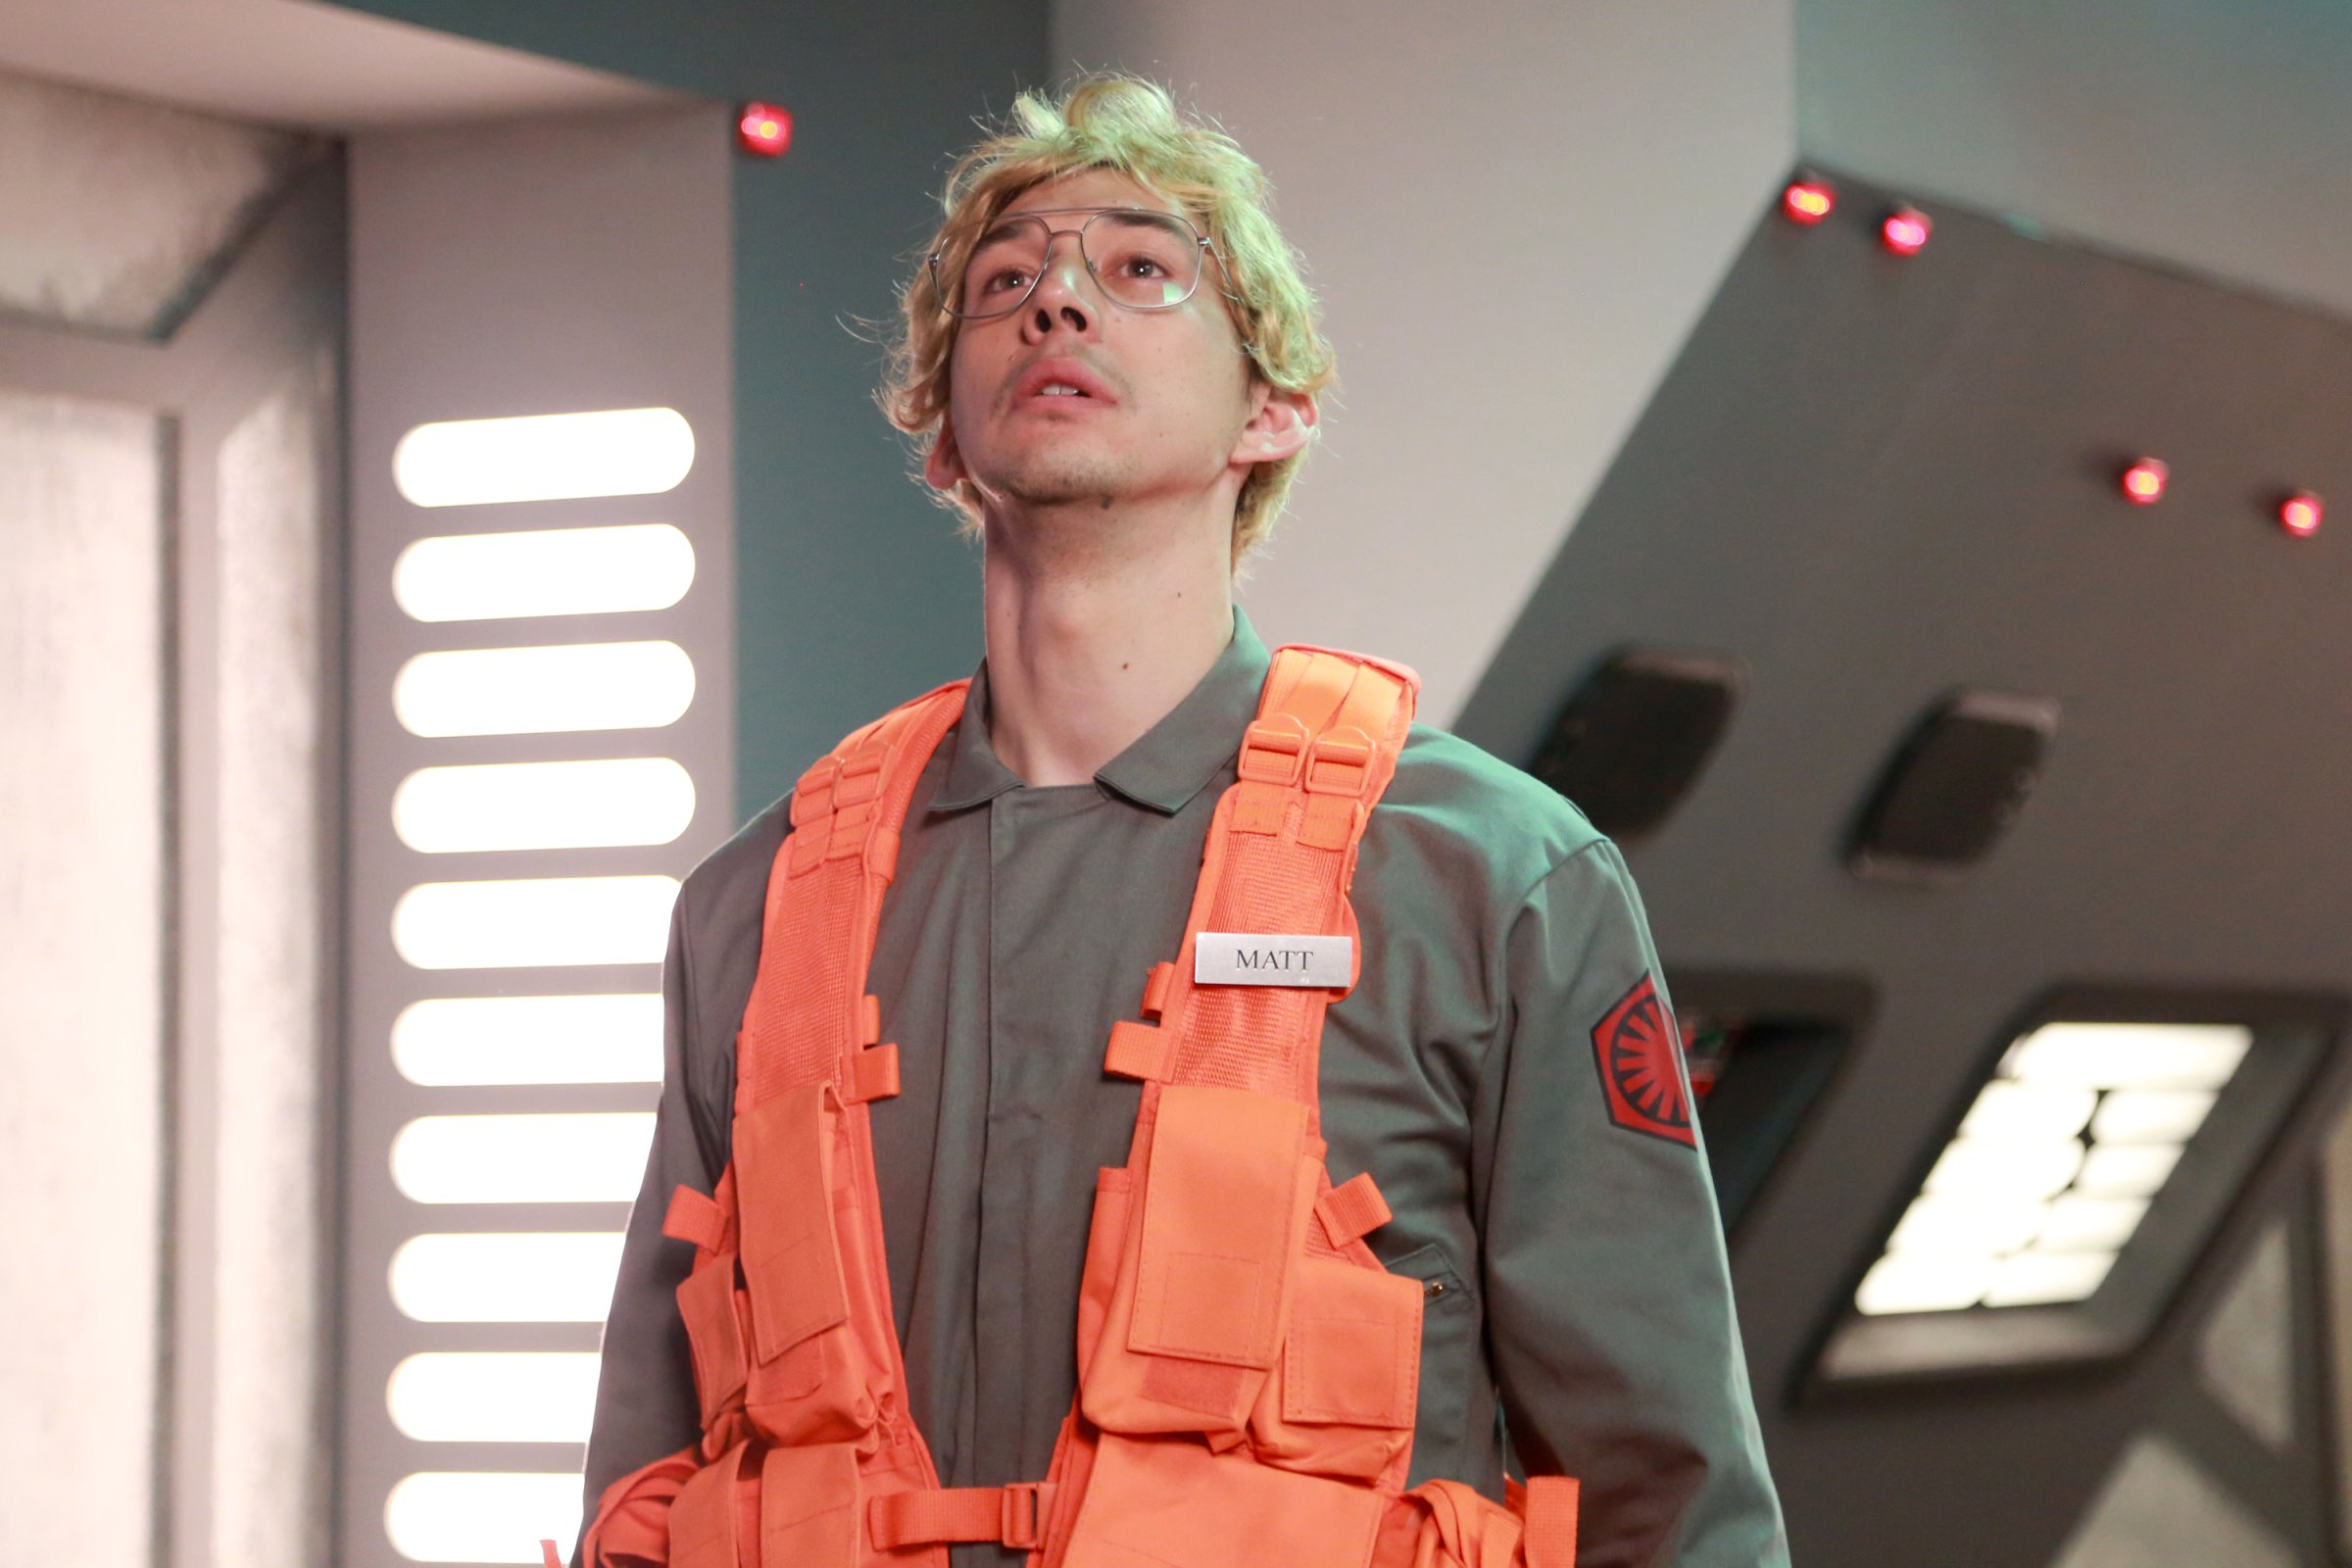 Adam Driver as Kylo Ren during the "Undercover Boss: Starkiller Base" Saturday Night Live sketch on January 16, 2016.